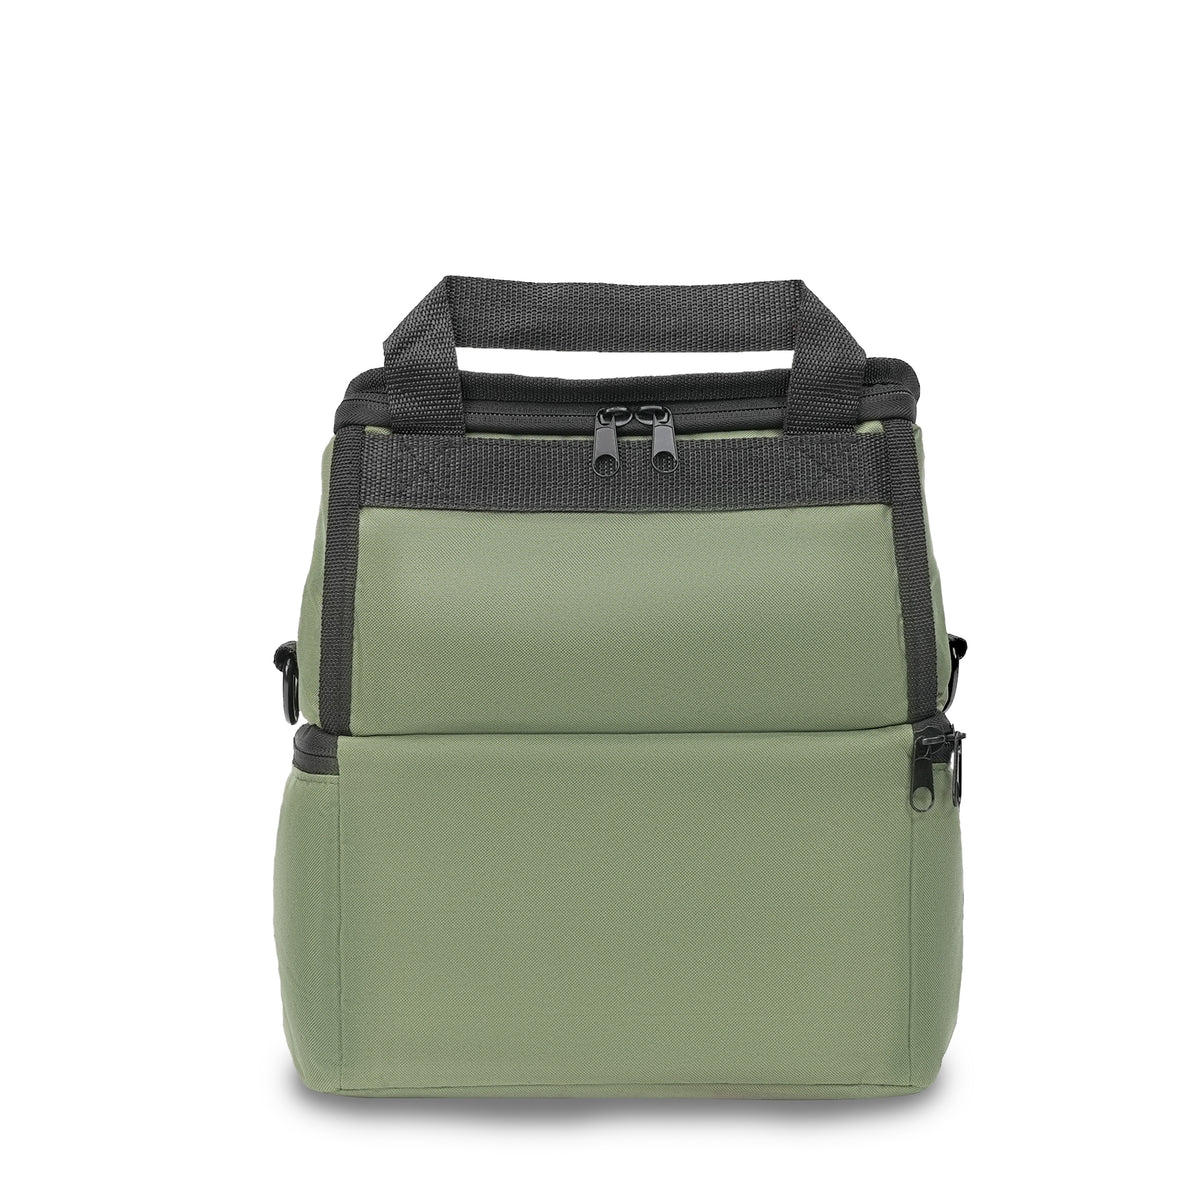 LAVA LUNCH Double Decker Insulated Green Lunch Box Bag - Hot Food For Up 5  Hours